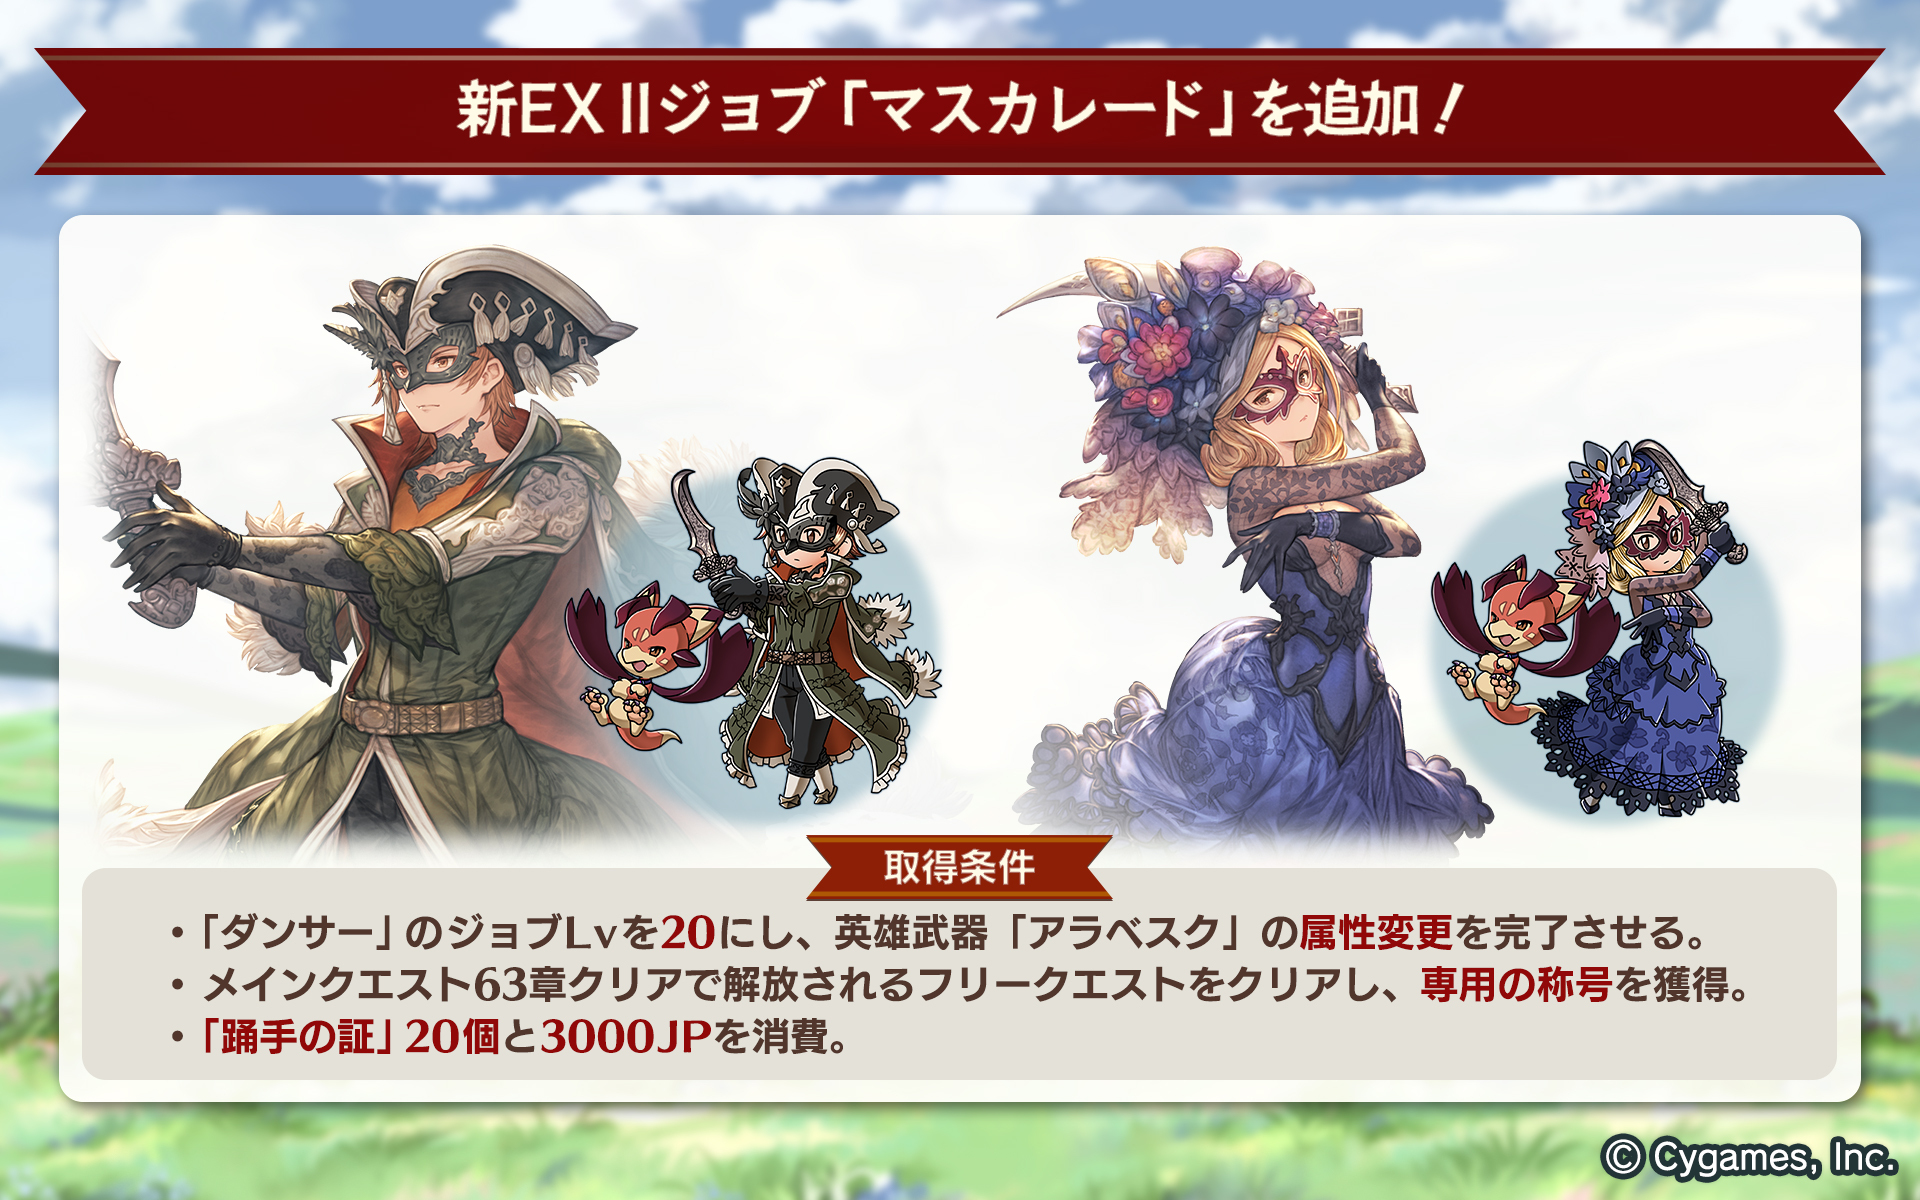 Granblue En Unofficial The Masquerade Class Is Now Live And Can Be Unlocked Time To Check Out What S Going On Here Next Twitter